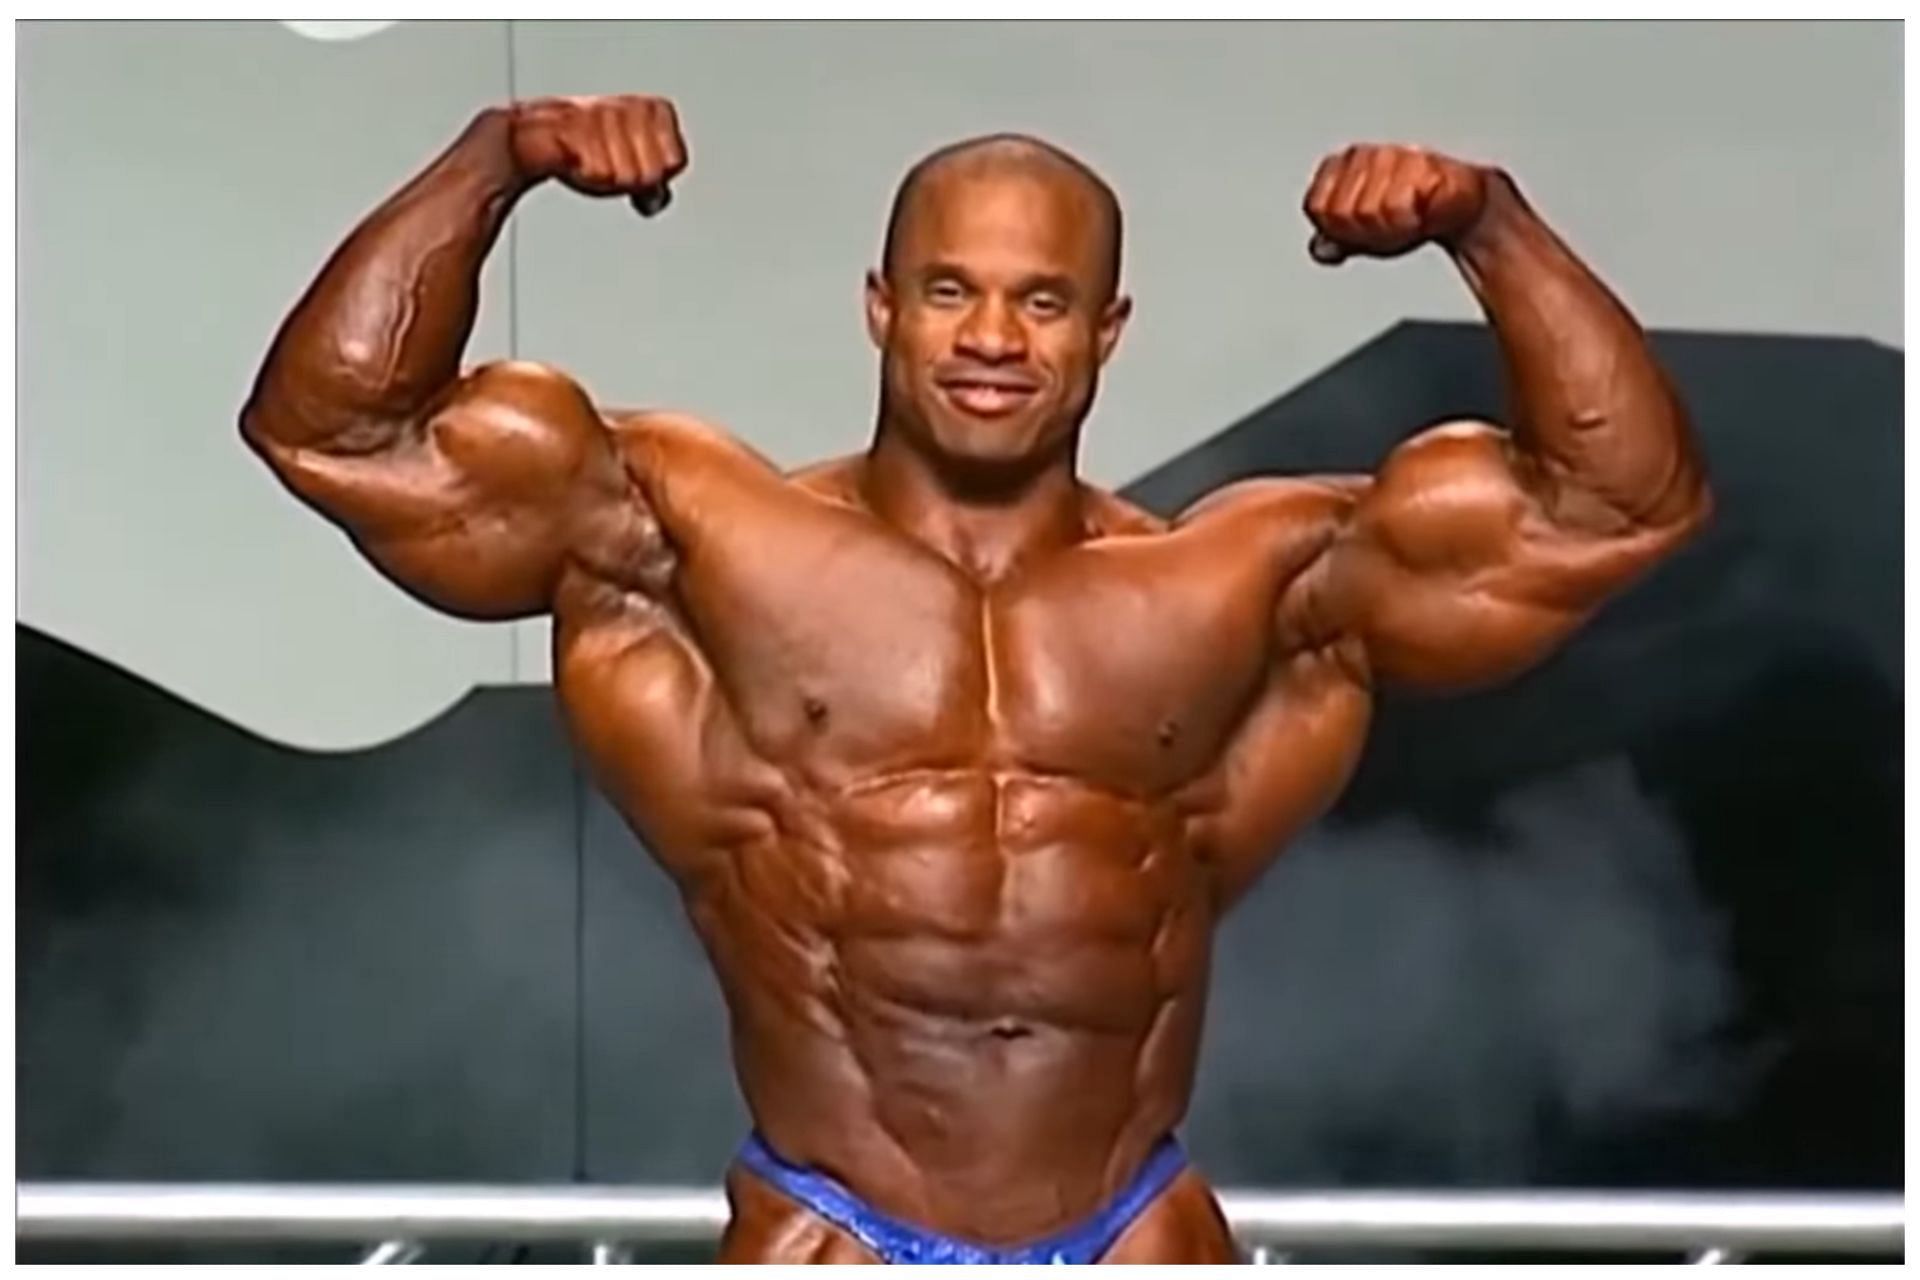 Victor Martinez posing at the Mr. Olympia in his prime: Image via YouTube (@Simon Fan)